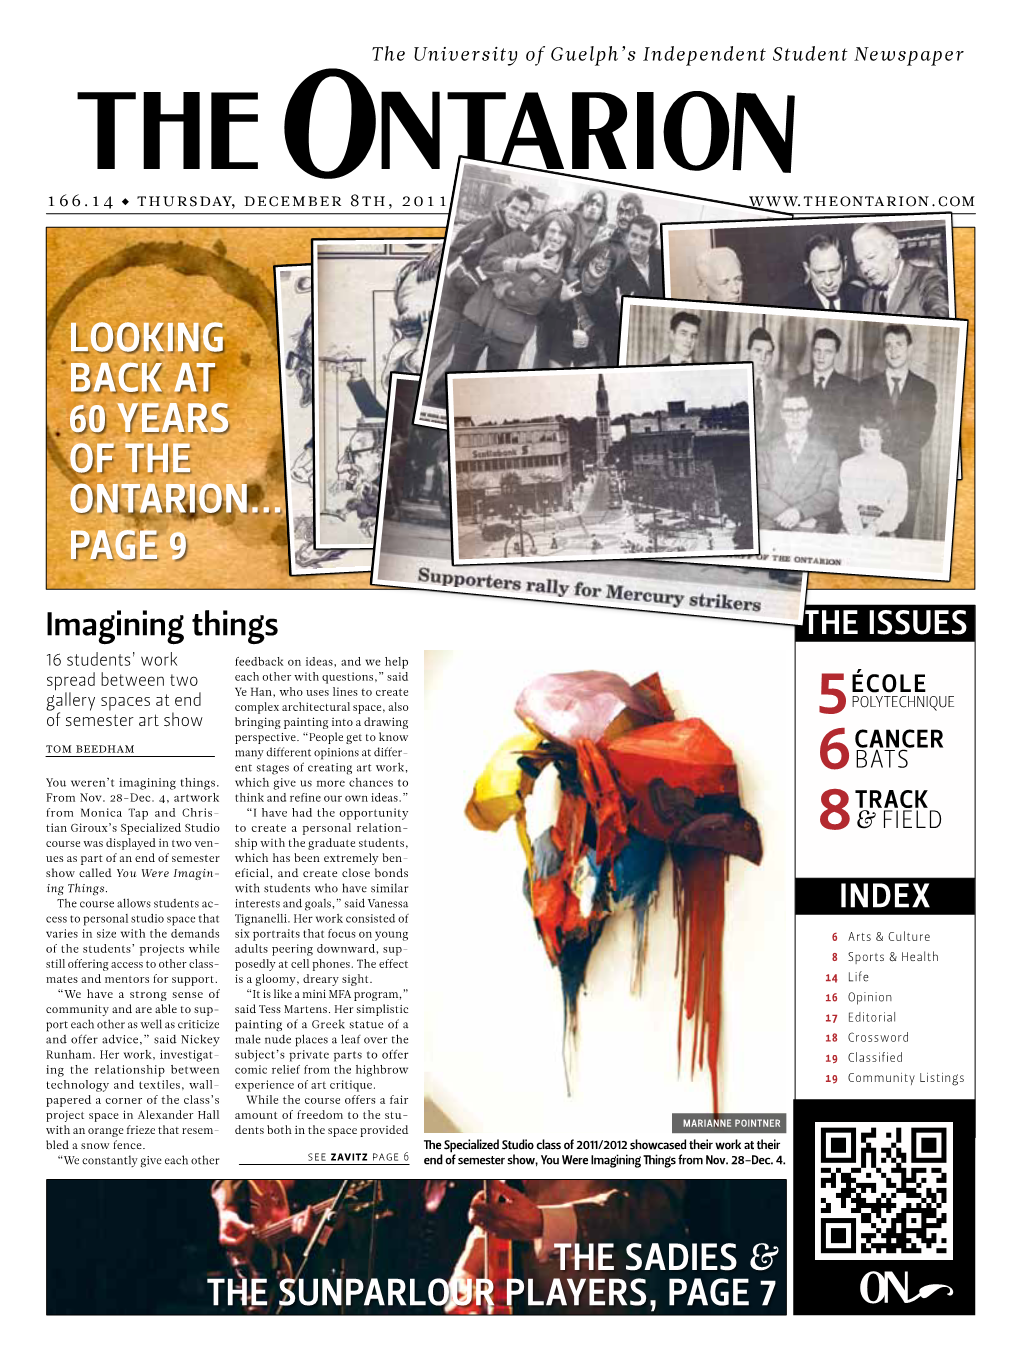 Looking Back at 60 Years of the Ontarion... Page 9